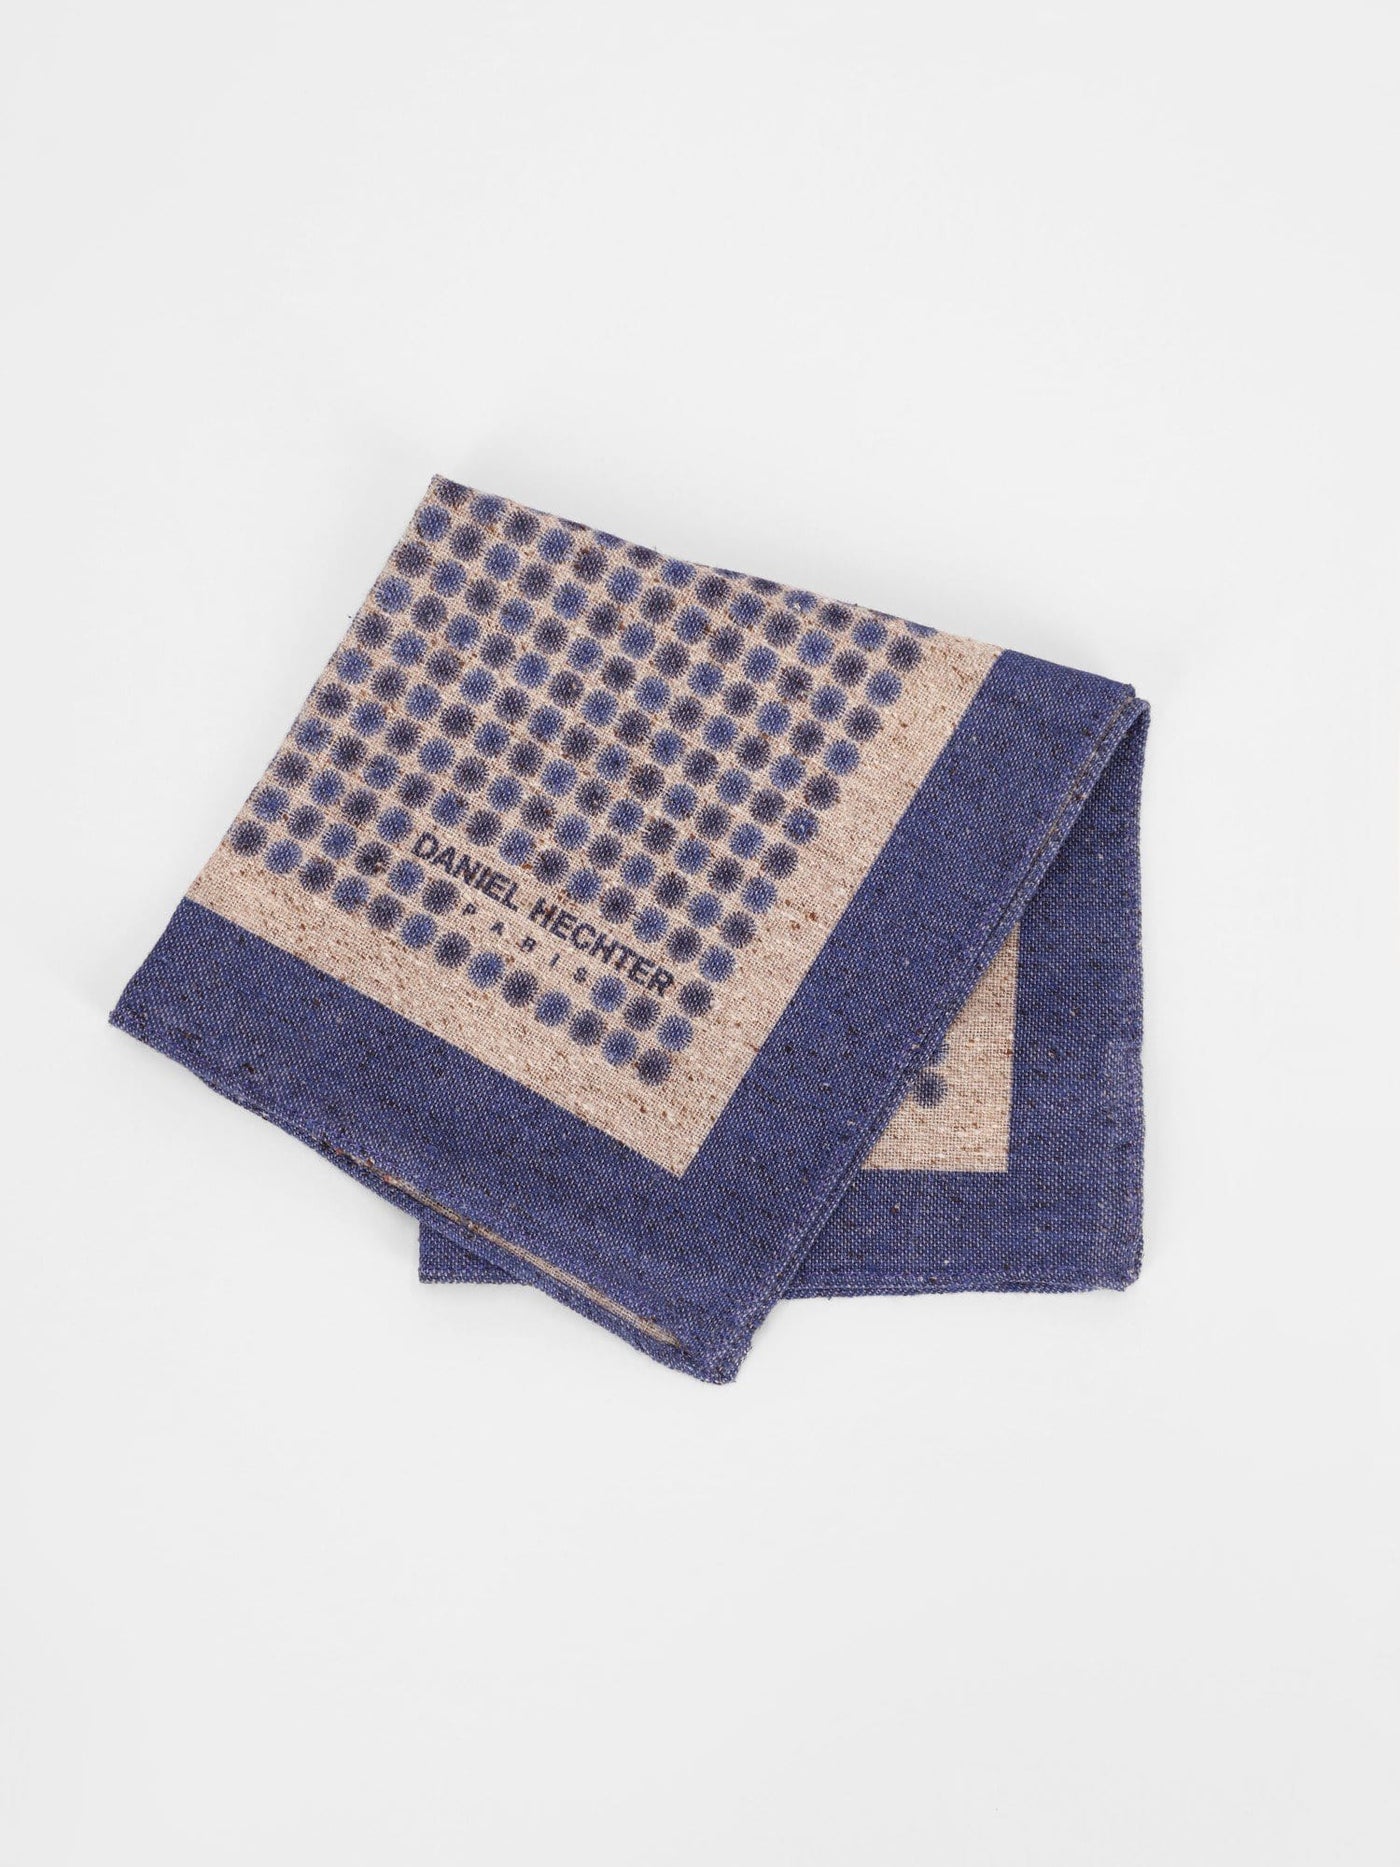 Daniel Hechter Other Accessories Dusty Blue / Os Wool Pocket Square with Dotted Print